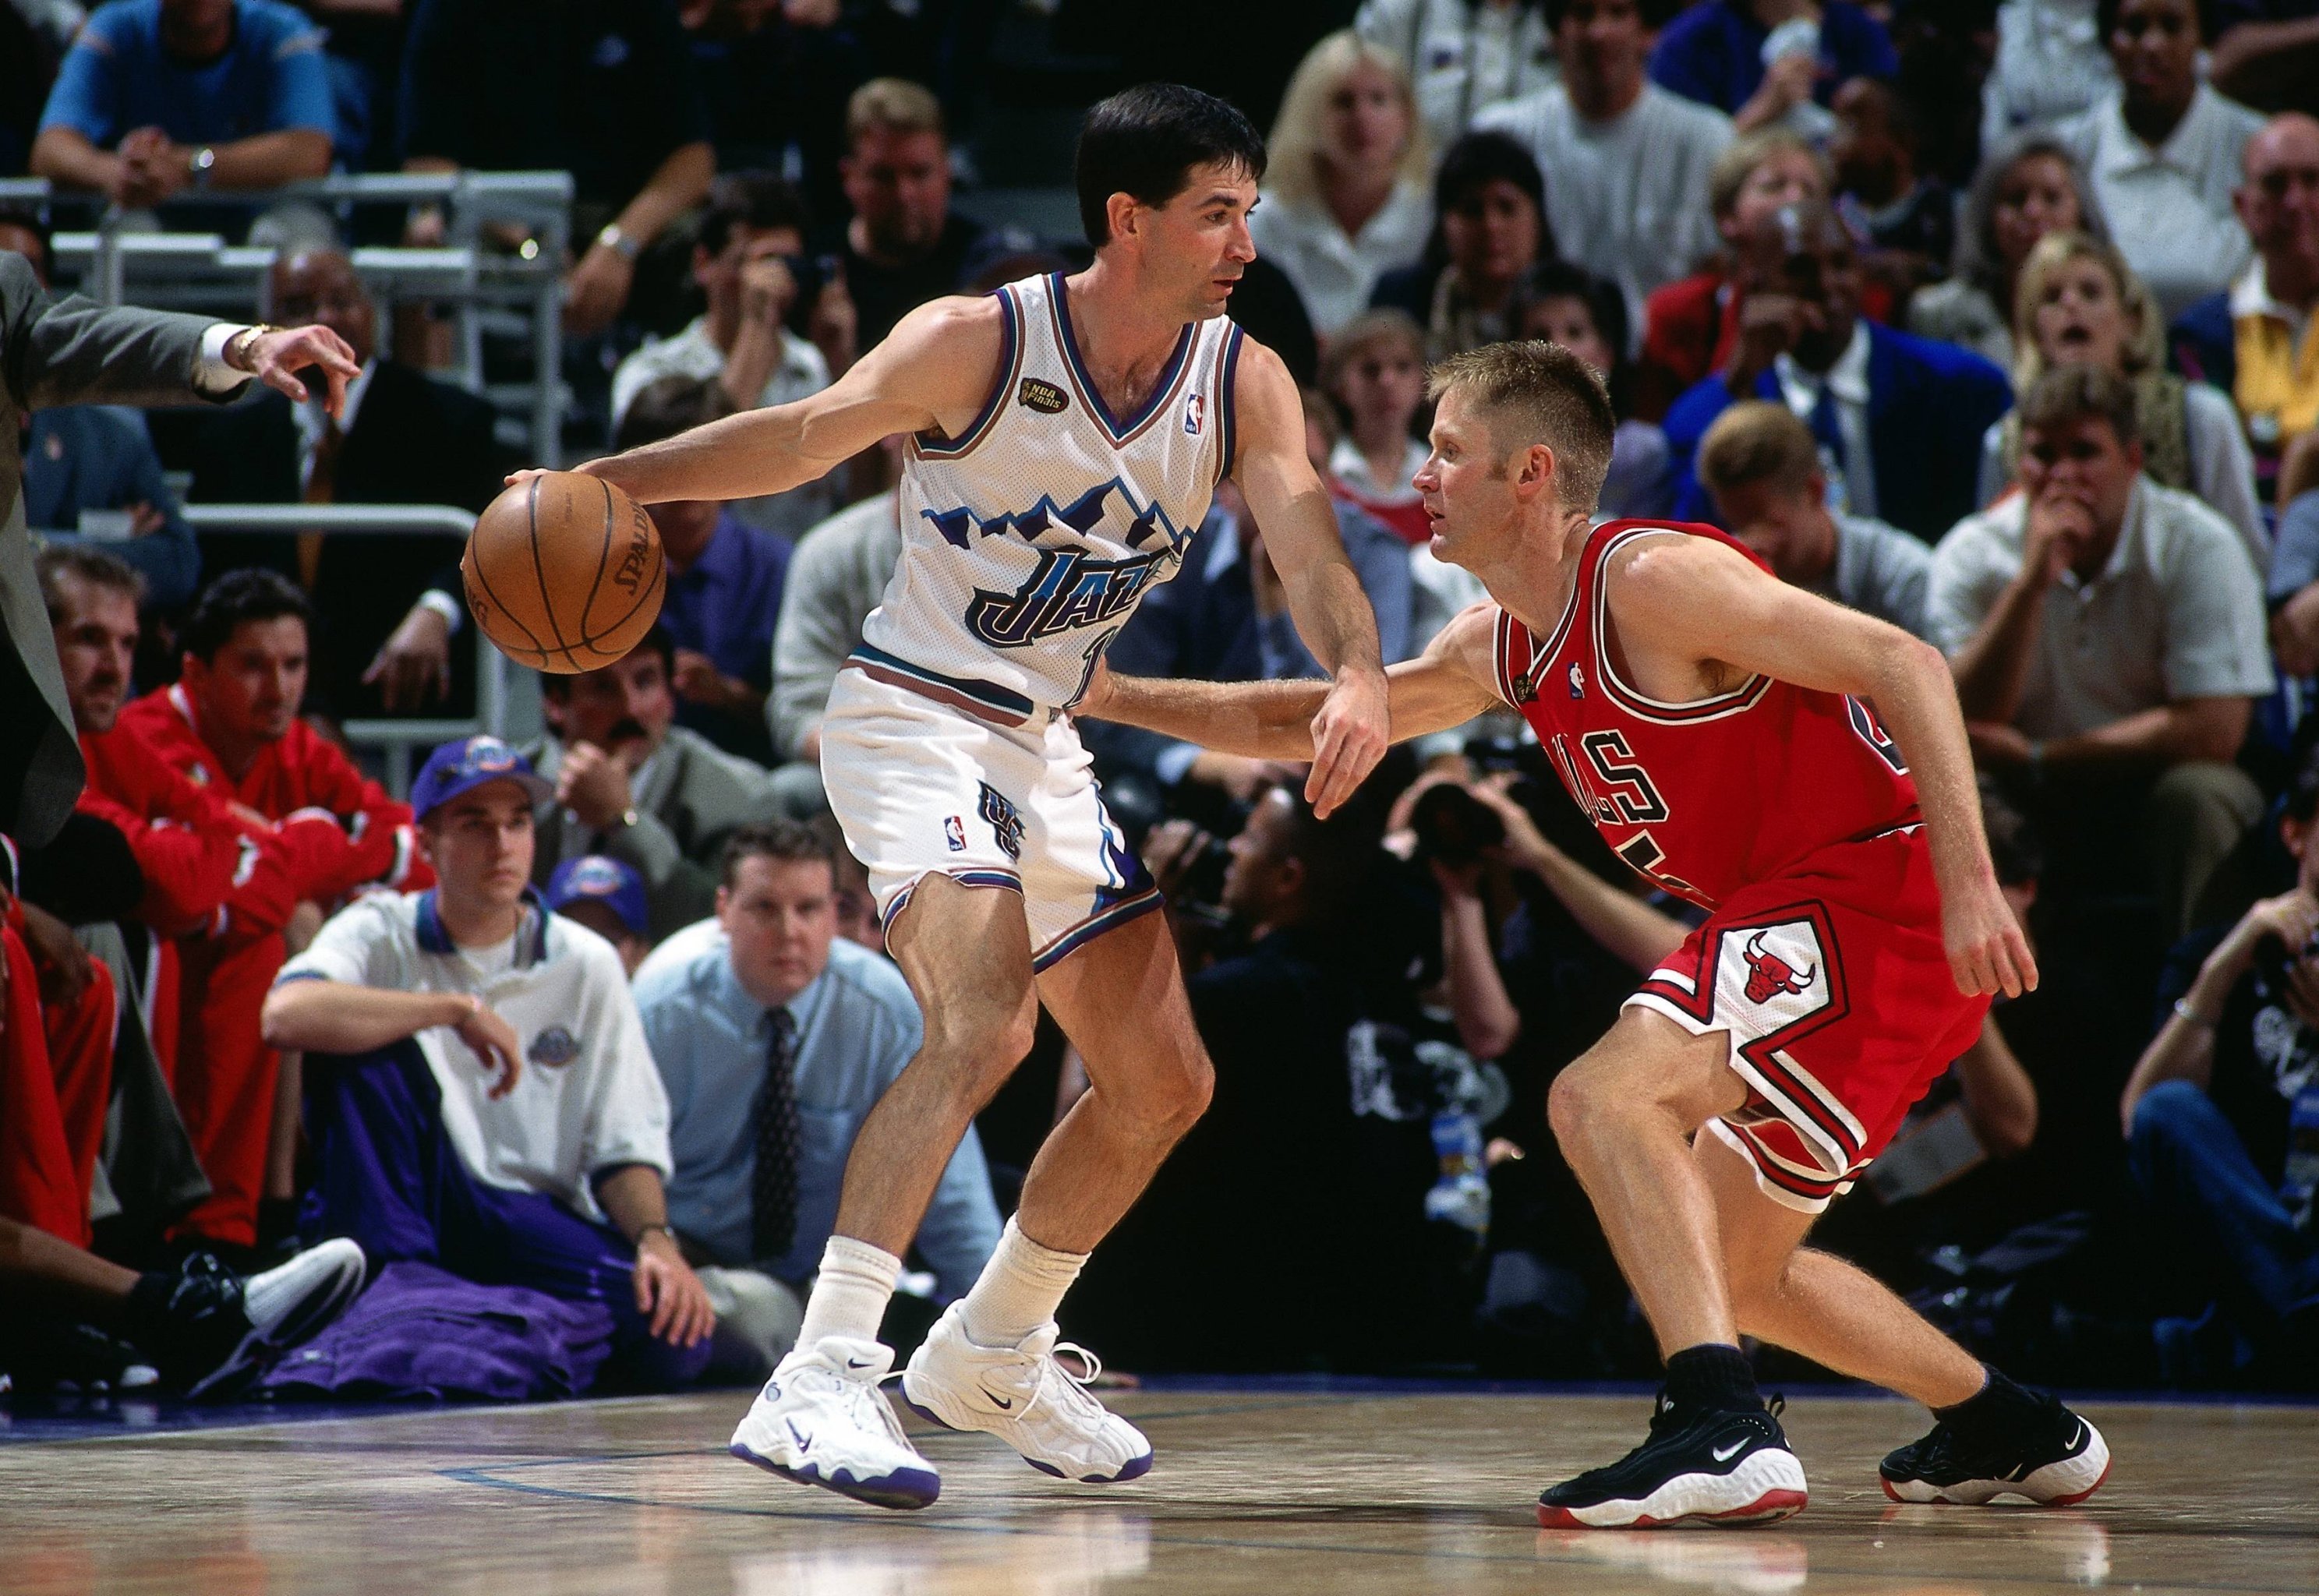 1997 NBA Finals odds: Who would win hypothetical Game 7 between